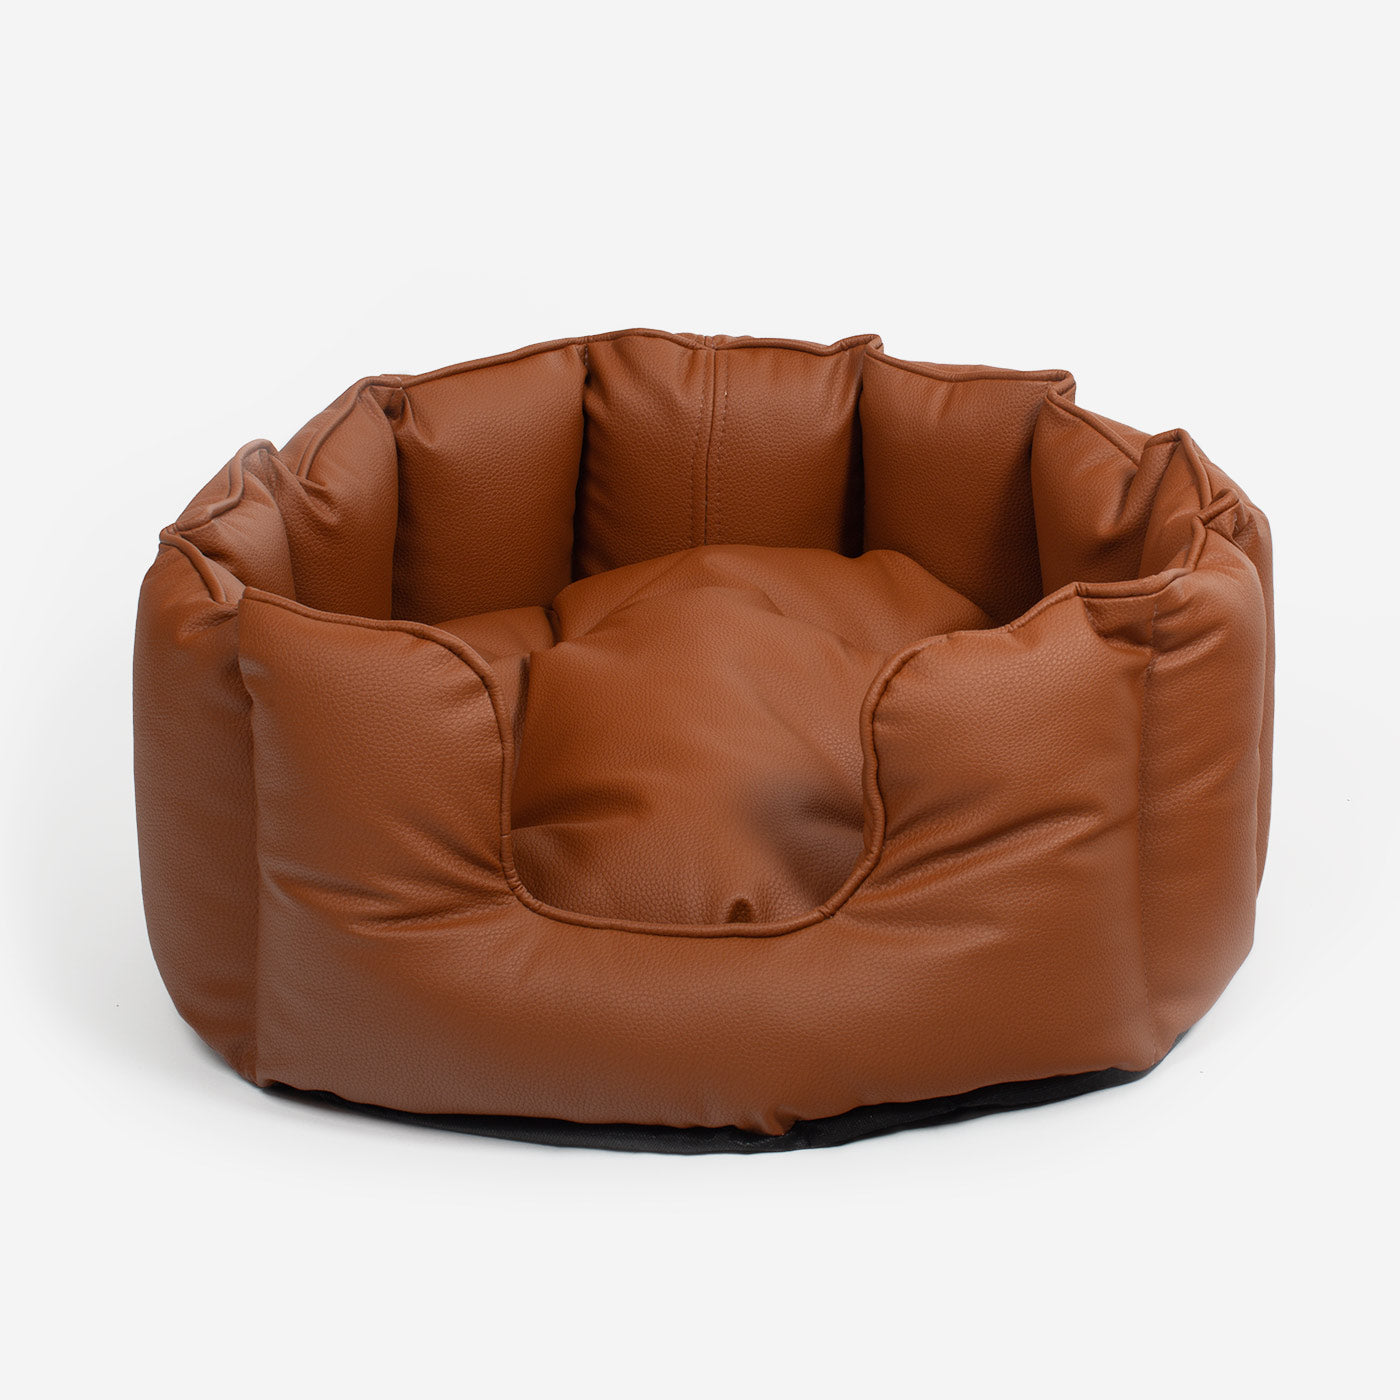 [colour:ember] Luxury Handmade High Wall in Rhino Tough Faux Leather, in Ember, Perfect For Your Pets Nap Time! Available To Personalise at Lords & Labradors